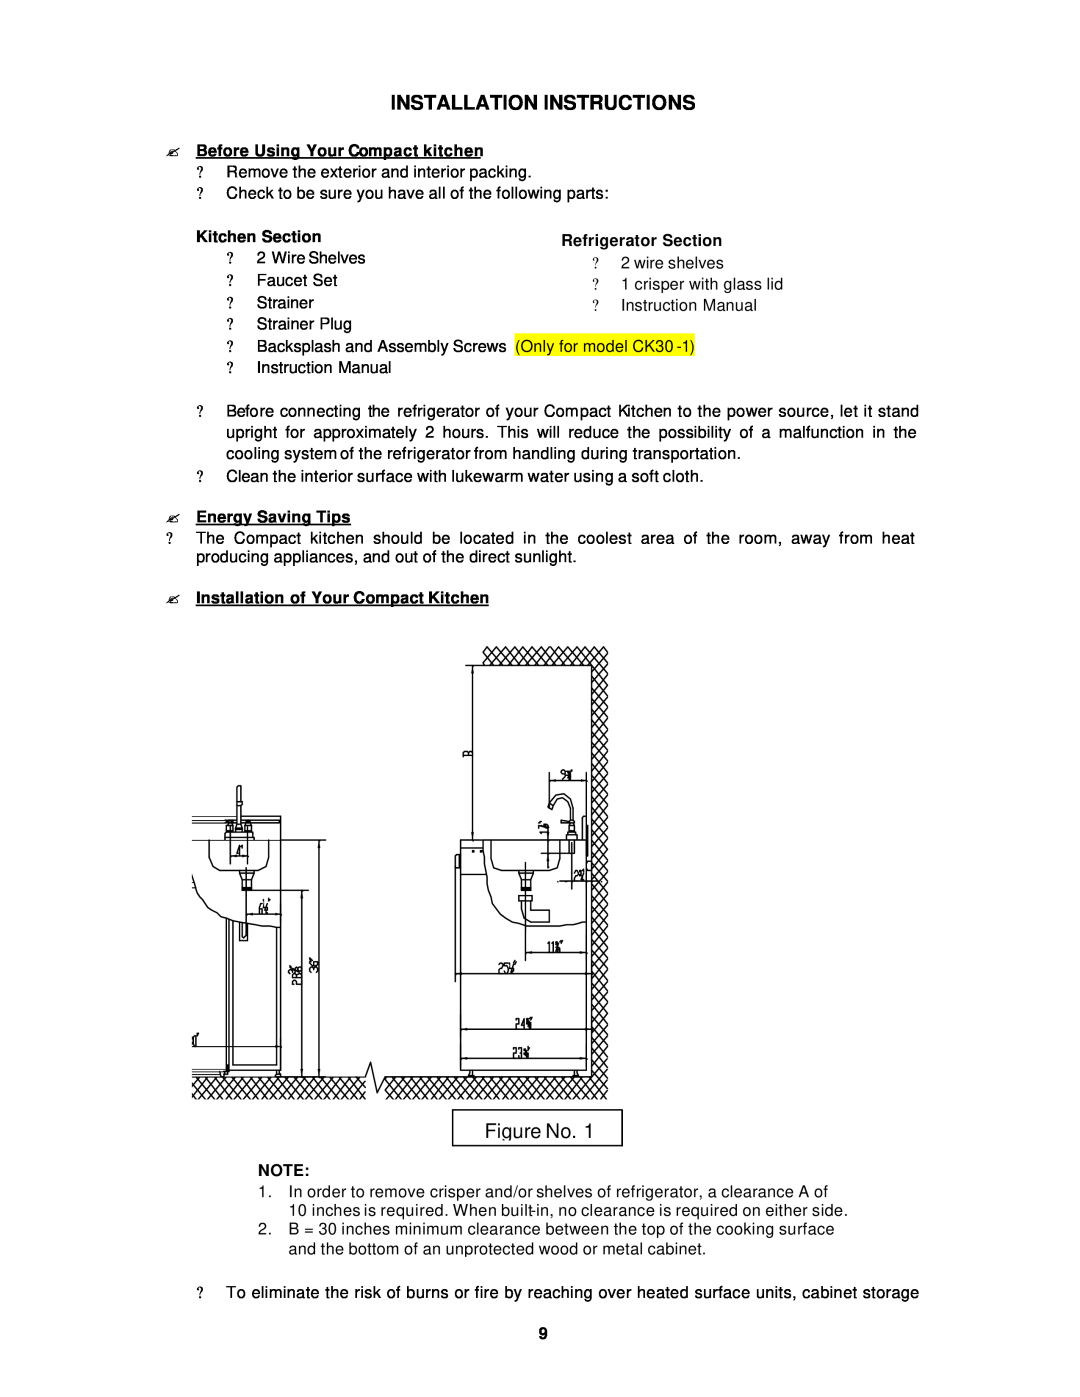 Avanti CK30-B, CK30-1 Installation Instructions, Figure No, ?Before Using Your Compact kitchen, Kitchen Section 